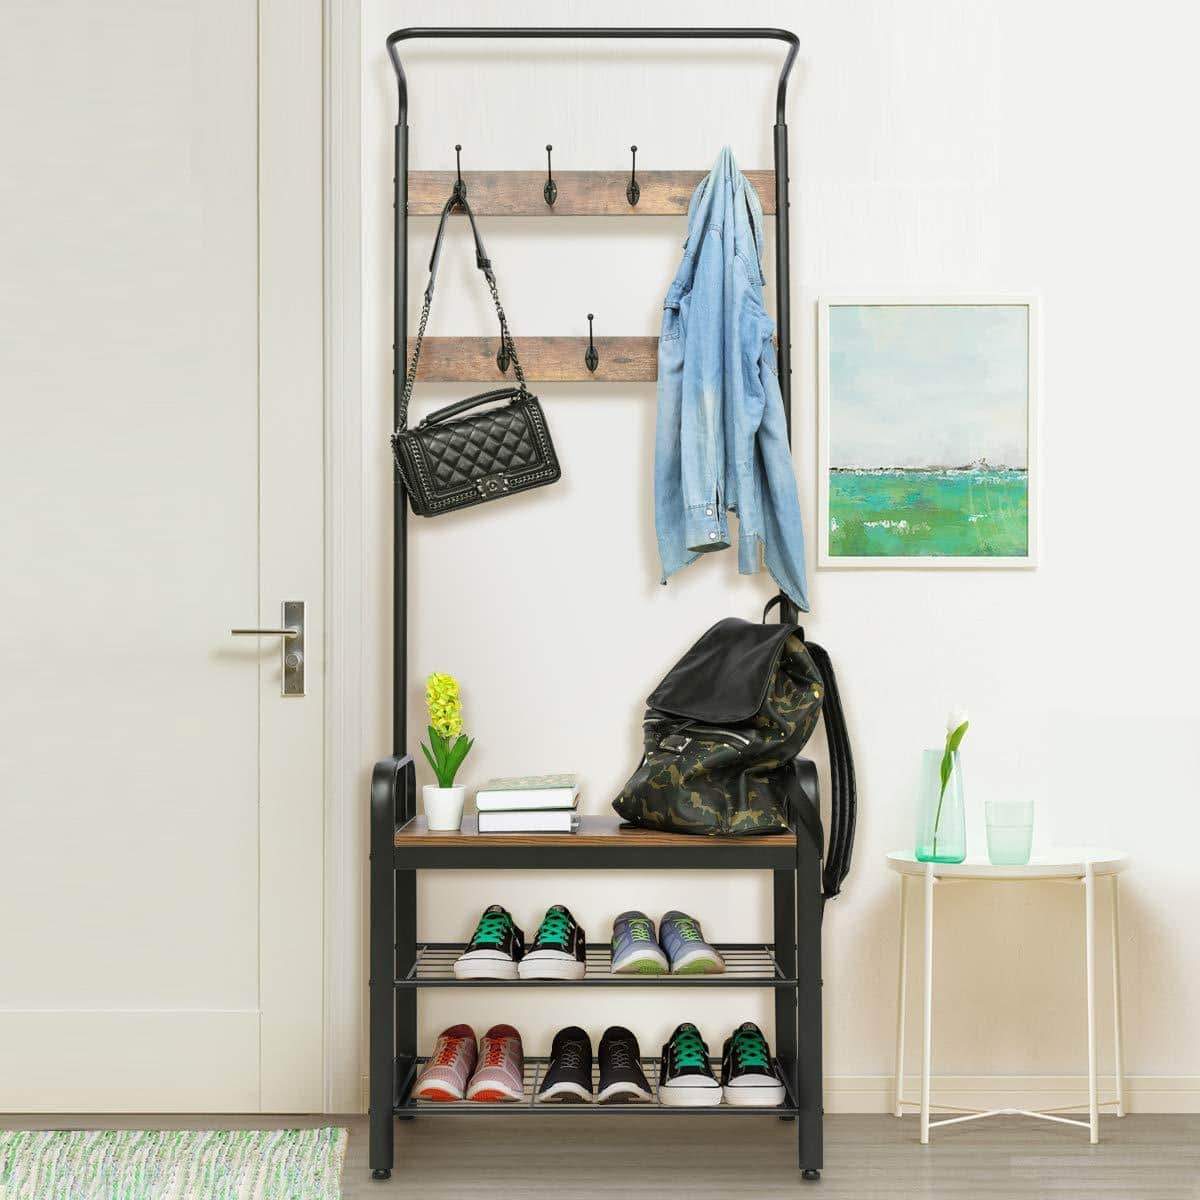 Storage kingso industrial coat rack hall tree entryway coat shoe rack 3 tier shoe bench 7 hooks wood look accent furniture with stable metal frame easy assembly